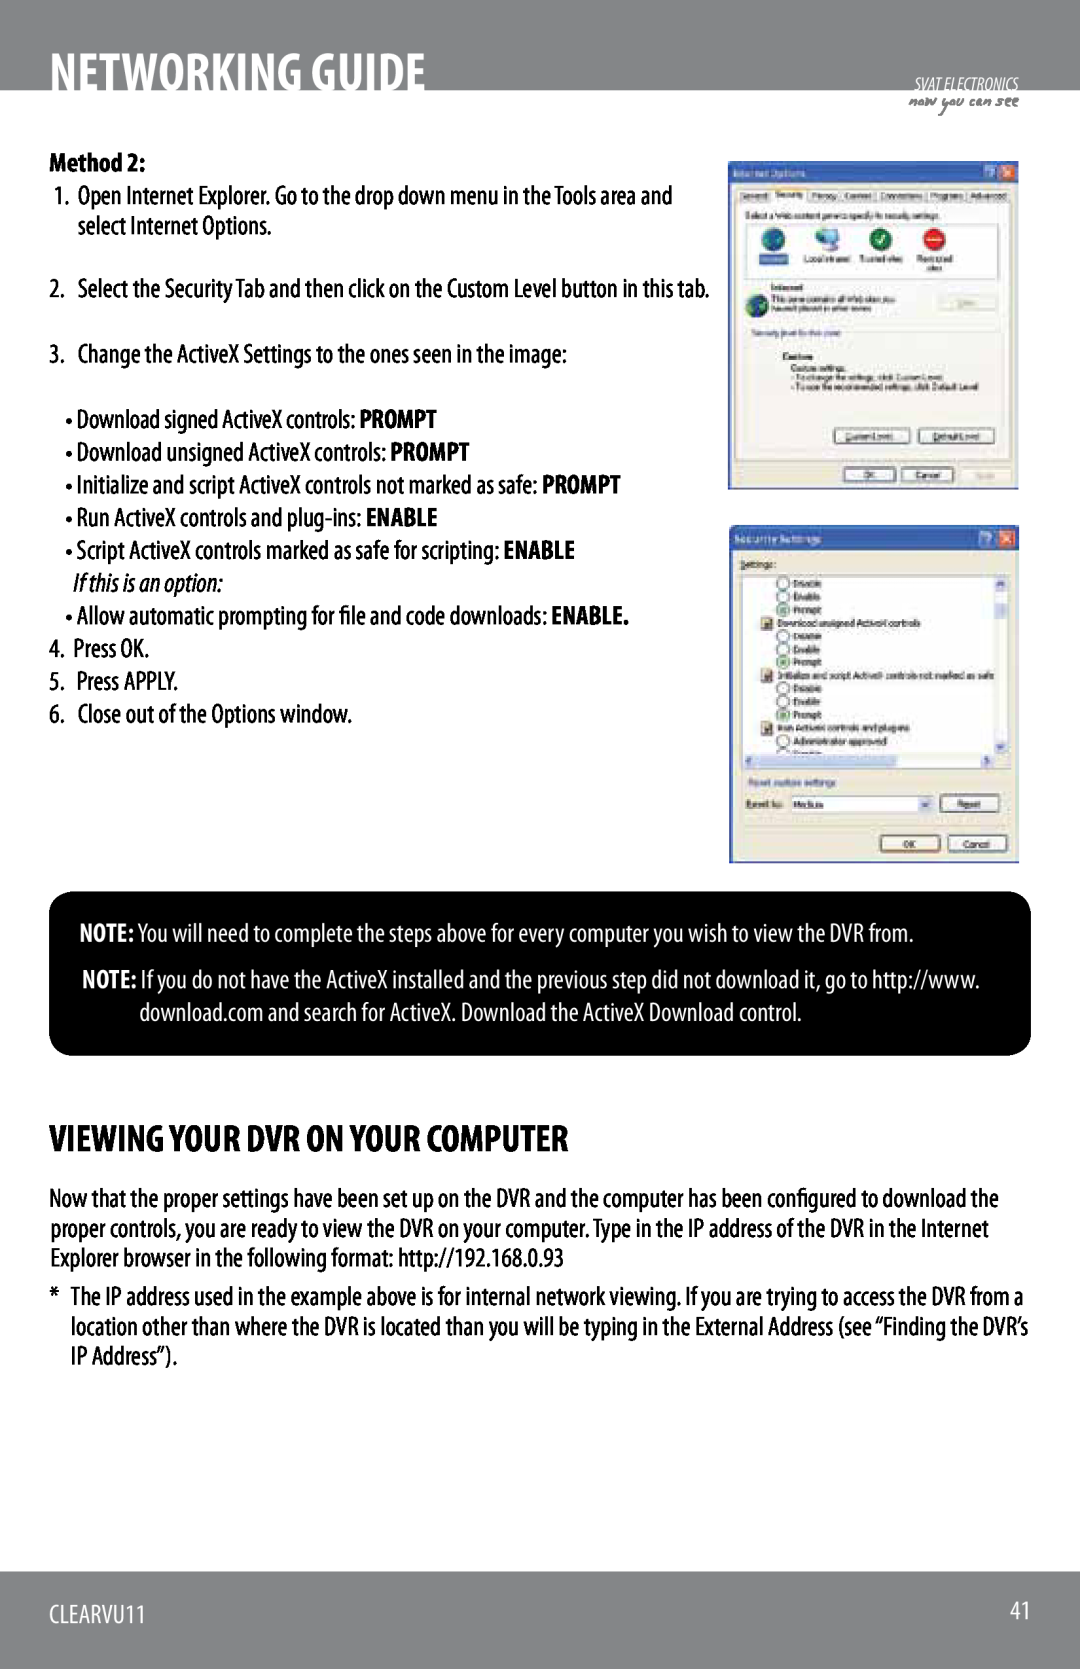 SVAT Electronics CLEARVU11 instruction manual Networking Guide, Viewing Your Dvr On Your Computer, If this is an option 